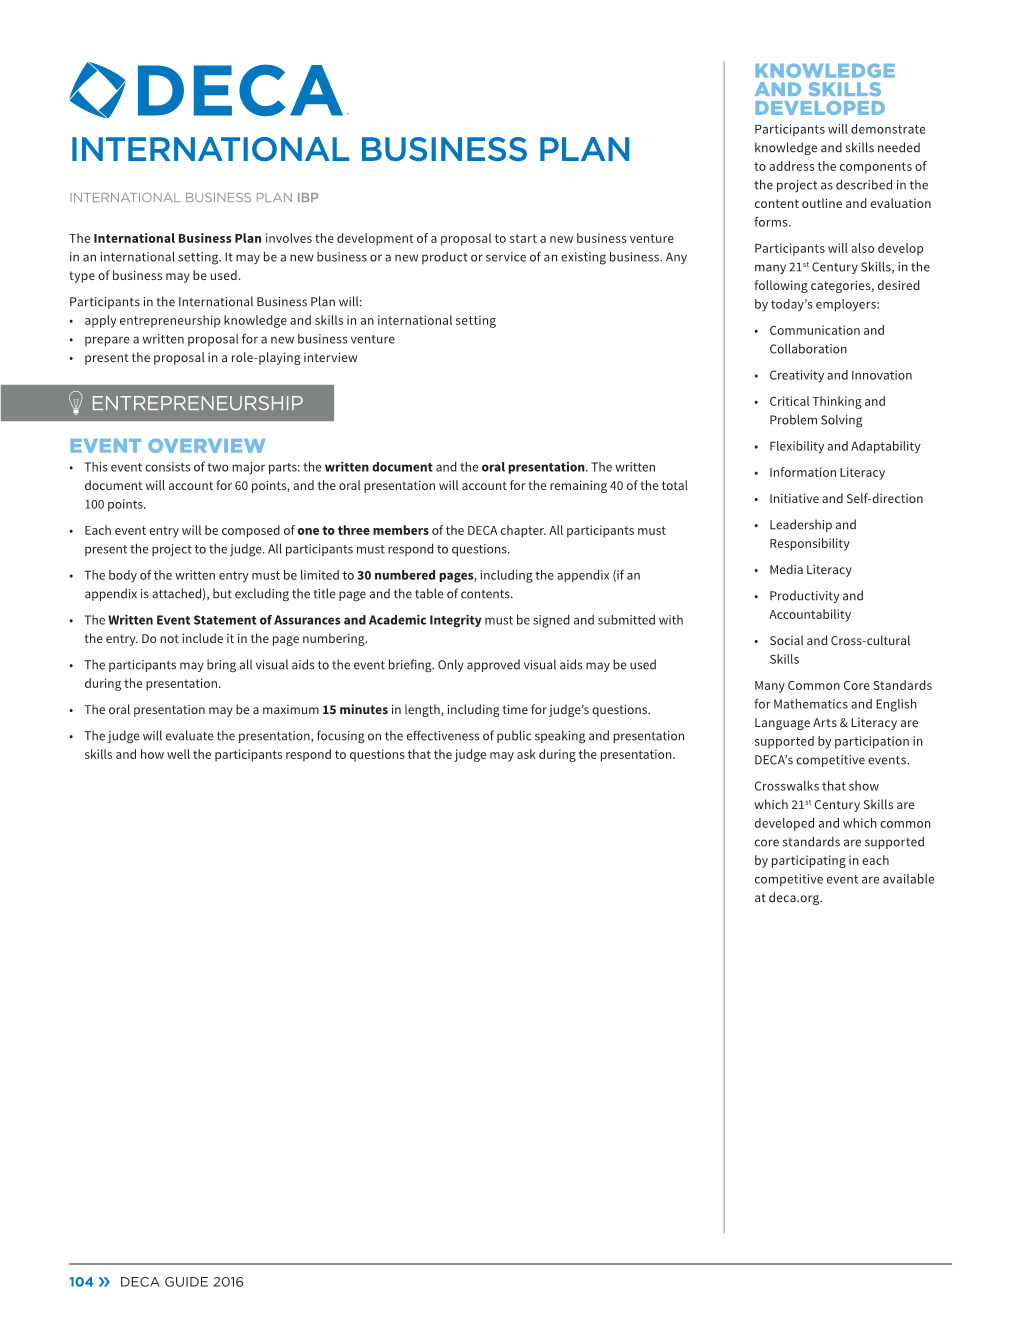 INTERNATIONAL BUSINESS PLAN to Address the Components of the Project As Described in the INTERNATIONAL BUSINESS PLAN IBP Content Outline and Evaluation Forms